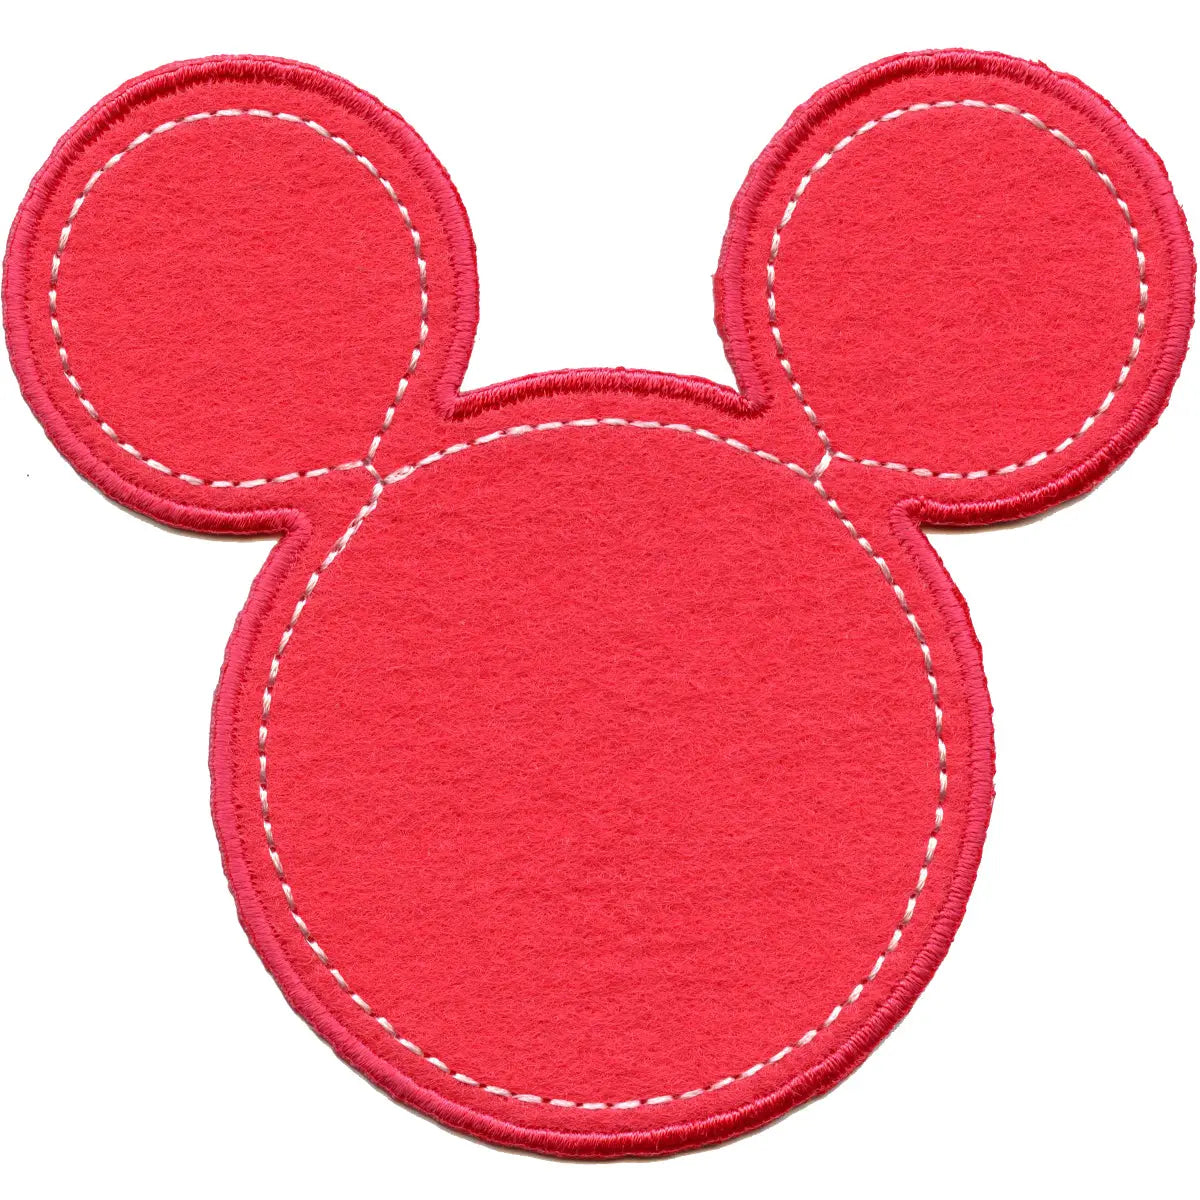 Disney Minnie Mouse Head Pink Embroidered Applique Iron On Patch 